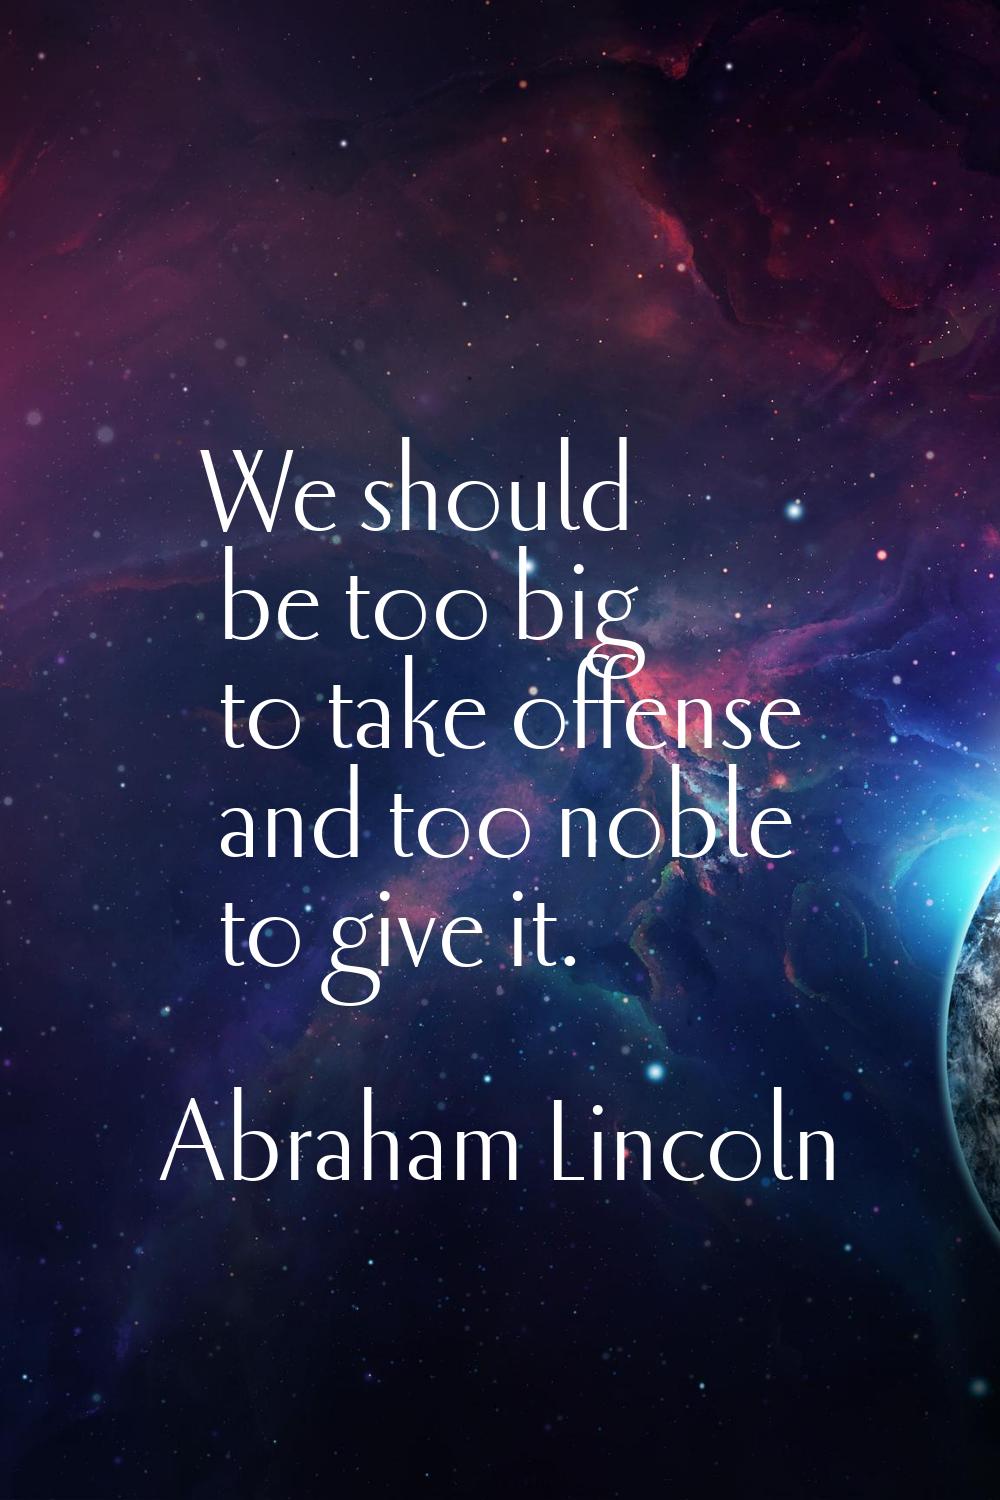 We should be too big to take offense and too noble to give it.